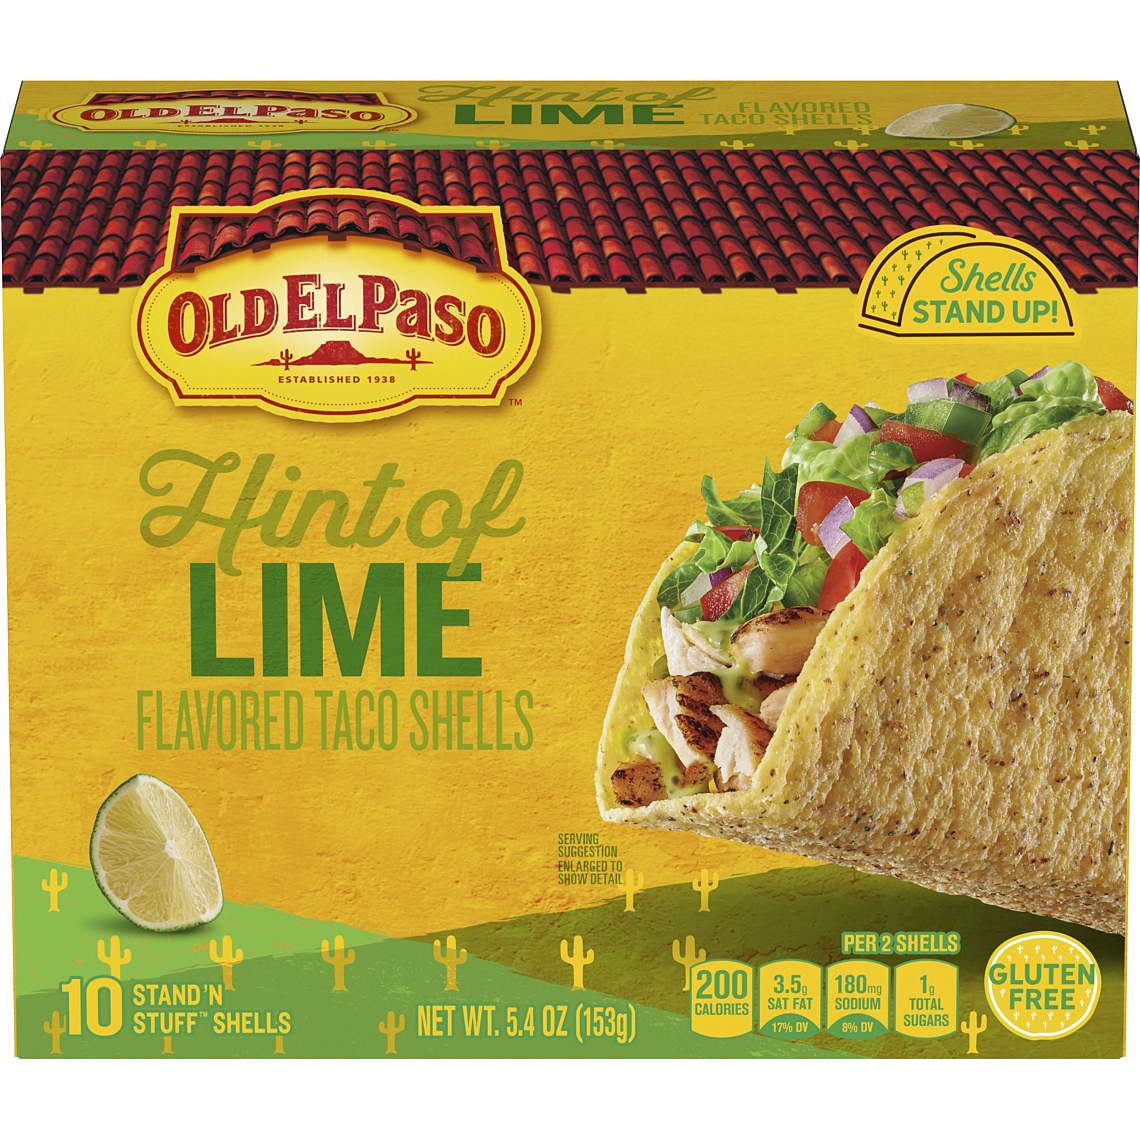 Shells - - Taco of Paso Lime El Stand Stuff Hint \'N Old